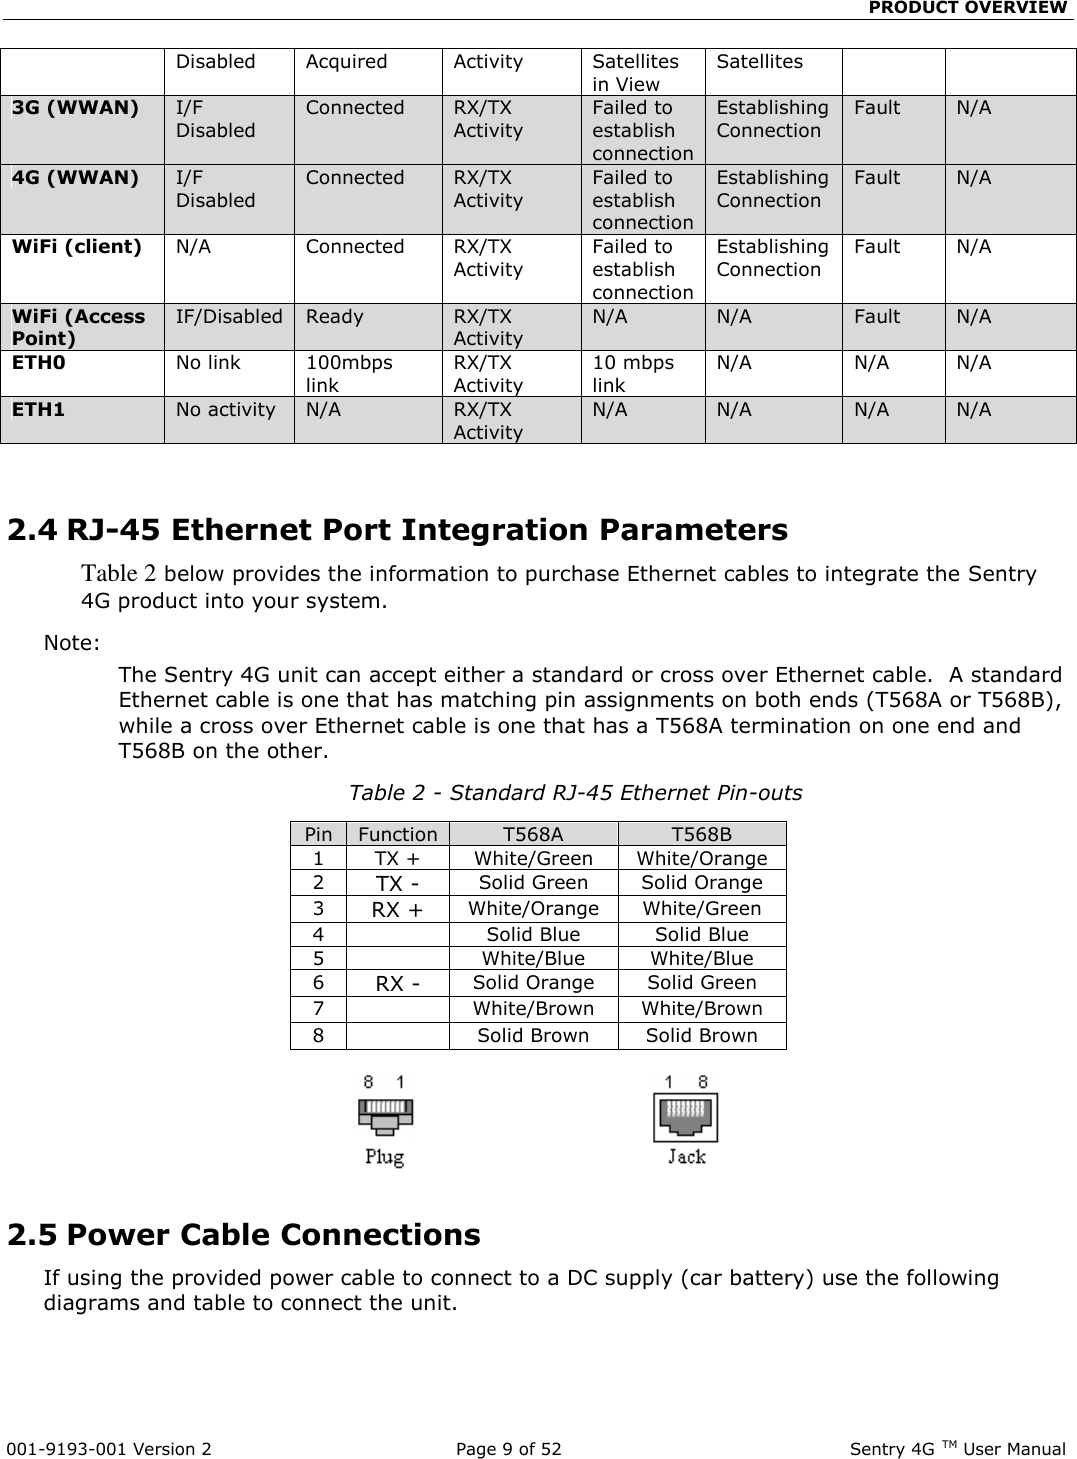                                                 PRODUCT OVERVIEW  001-9193-001 Version 2              Page 9 of 52                             Sentry 4G TM User Manual Disabled Acquired Activity Satellites in View Satellites 3G (WWAN) I/F Disabled Connected RX/TX Activity Failed to establish connection Establishing Connection Fault  N/A  4G (WWAN) I/F Disabled Connected RX/TX Activity Failed to establish connection Establishing Connection Fault  N/A WiFi (client) N/A  Connected RX/TX Activity Failed to establish connection Establishing Connection Fault N/A WiFi (Access Point) IF/Disabled Ready RX/TX Activity N/A N/A Fault N/A ETH0 No link 100mbps link RX/TX Activity 10 mbps link N/A N/A N/A ETH1 No activity N/A RX/TX Activity N/A N/A N/A N/A   2.4 RJ-45 Ethernet Port Integration Parameters Table 2 below provides the information to purchase Ethernet cables to integrate the Sentry 4G product into your system.  Note:   The Sentry 4G unit can accept either a standard or cross over Ethernet cable.  A standard Ethernet cable is one that has matching pin assignments on both ends (T568A or T568B), while a cross over Ethernet cable is one that has a T568A termination on one end and T568B on the other. Table 2 - Standard RJ-45 Ethernet Pin-outs Pin Function T568A T568B 1 TX + White/Green White/Orange 2 TX - Solid Green Solid Orange 3 RX + White/Orange White/Green 4  Solid Blue Solid Blue 5  White/Blue White/Blue 6 RX - Solid Orange Solid Green 7  White/Brown White/Brown 8  Solid Brown Solid Brown                                            2.5 Power Cable Connections If using the provided power cable to connect to a DC supply (car battery) use the following diagrams and table to connect the unit.   